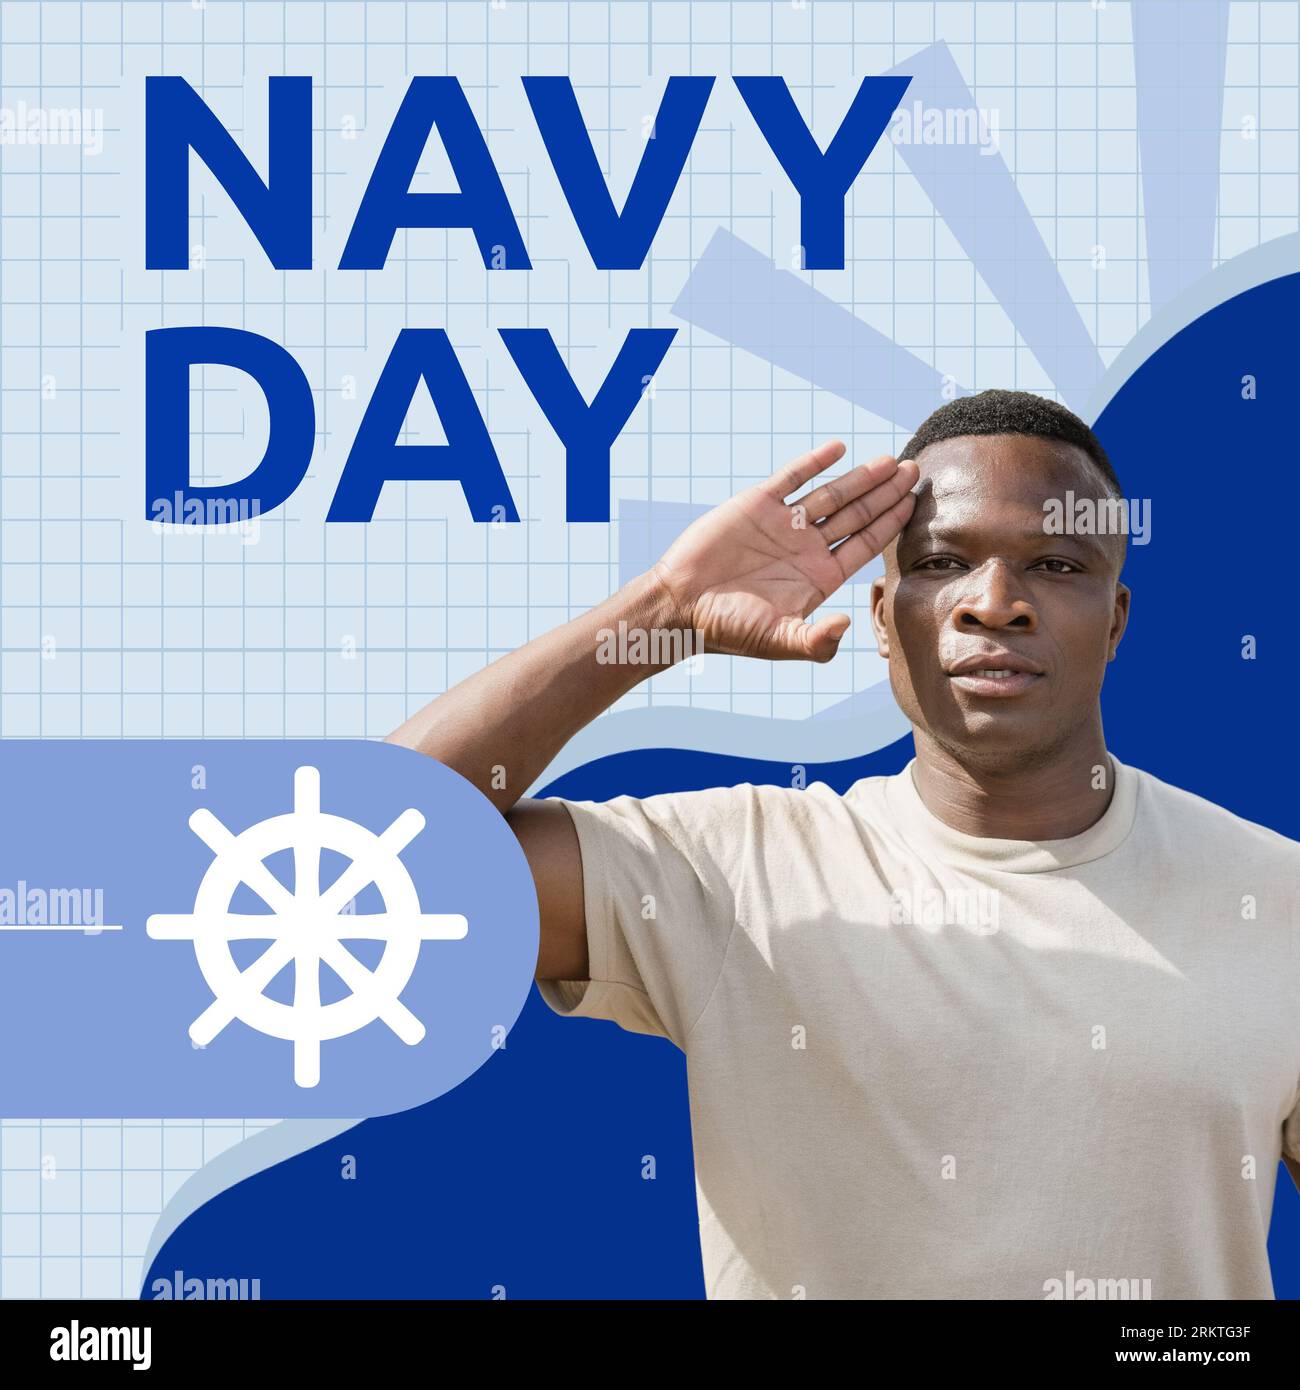 Composite of navy day text with steering wheel over african american army soldier saluting on grid Stock Photo